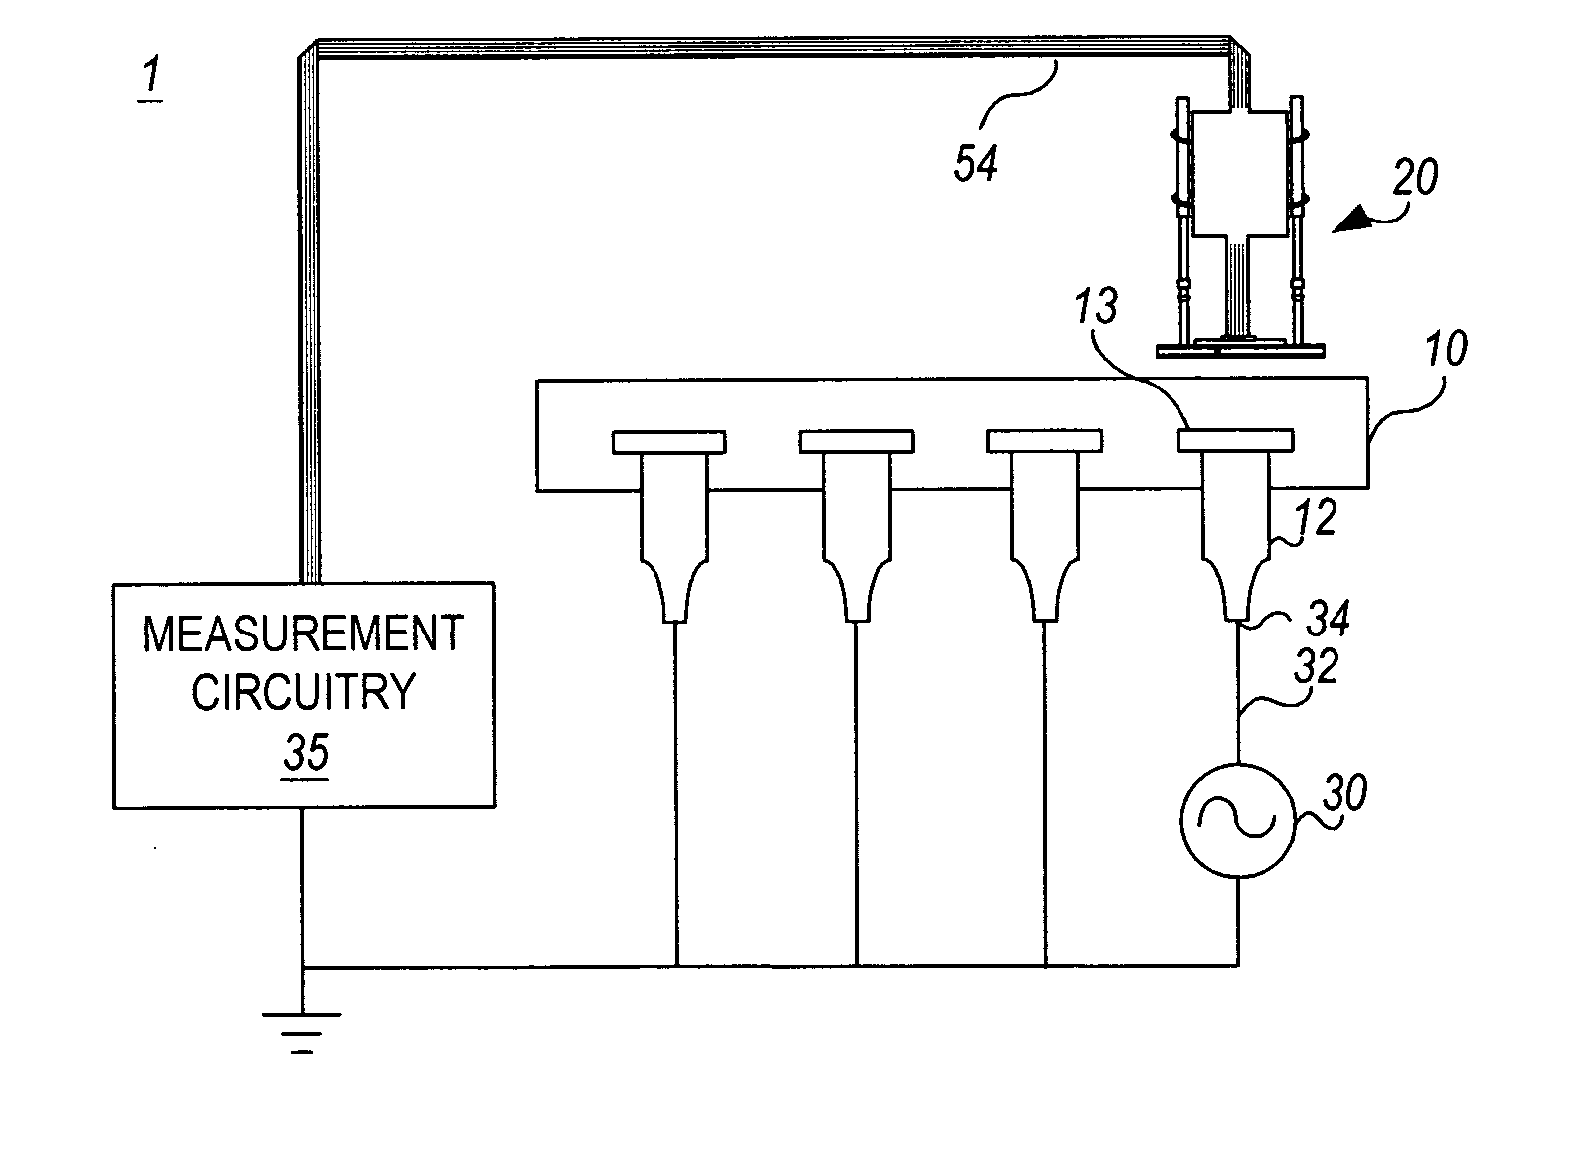 Capacitive probe assembly with flex circuit